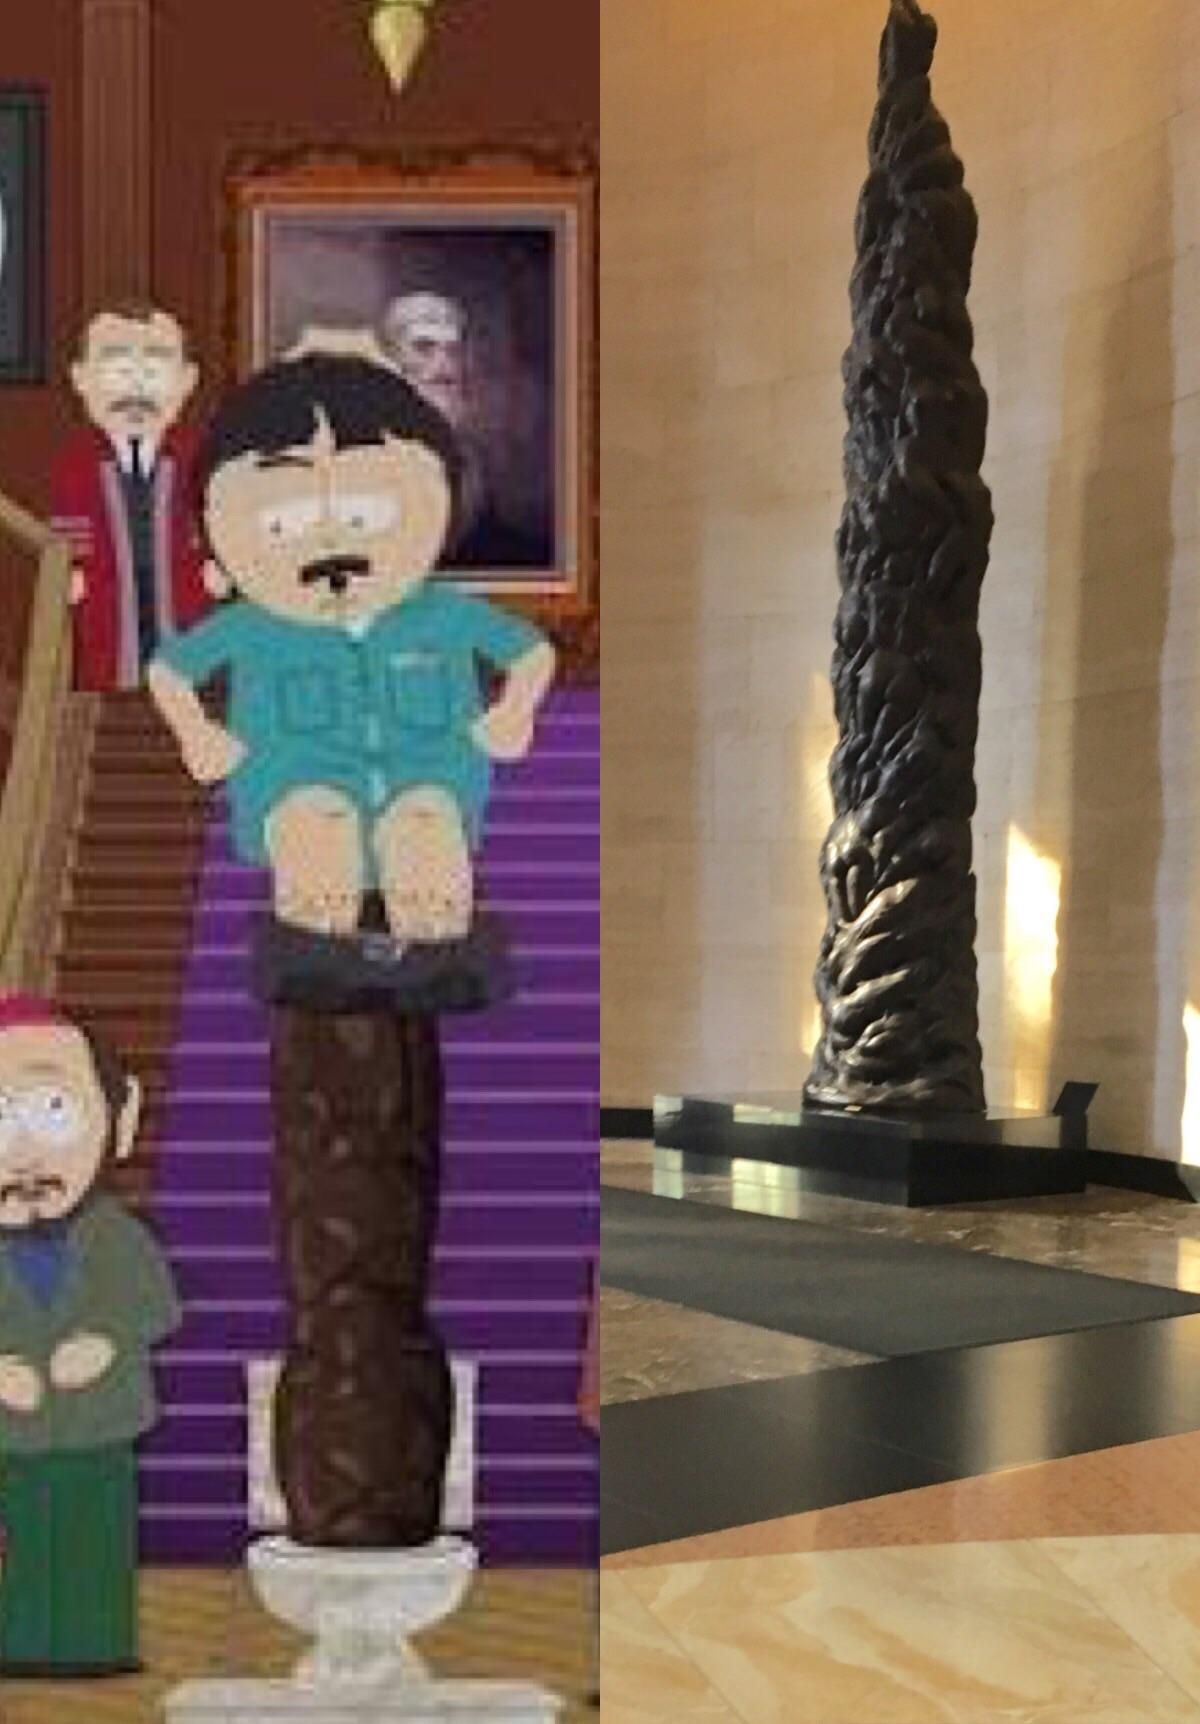 This sculpture in the lobby where i work. Got a fair idea of where the inspiration for it came from